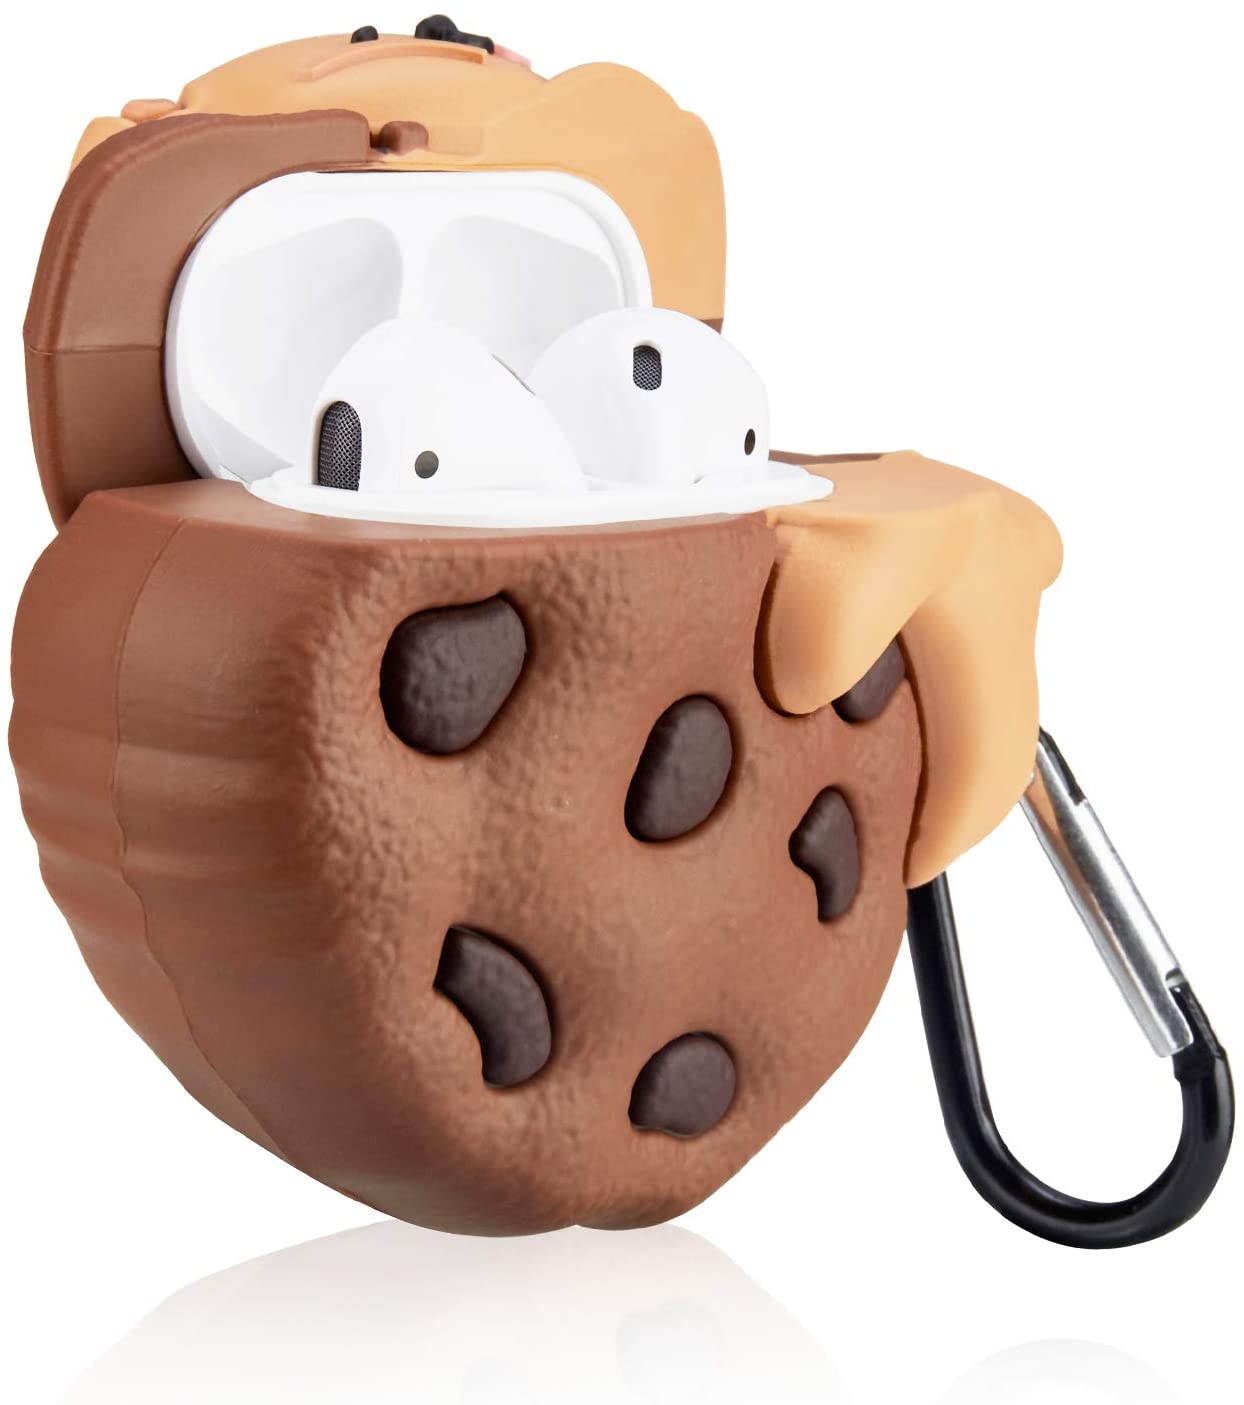 Bear Hugging Chocolate Cookie Airpods Case